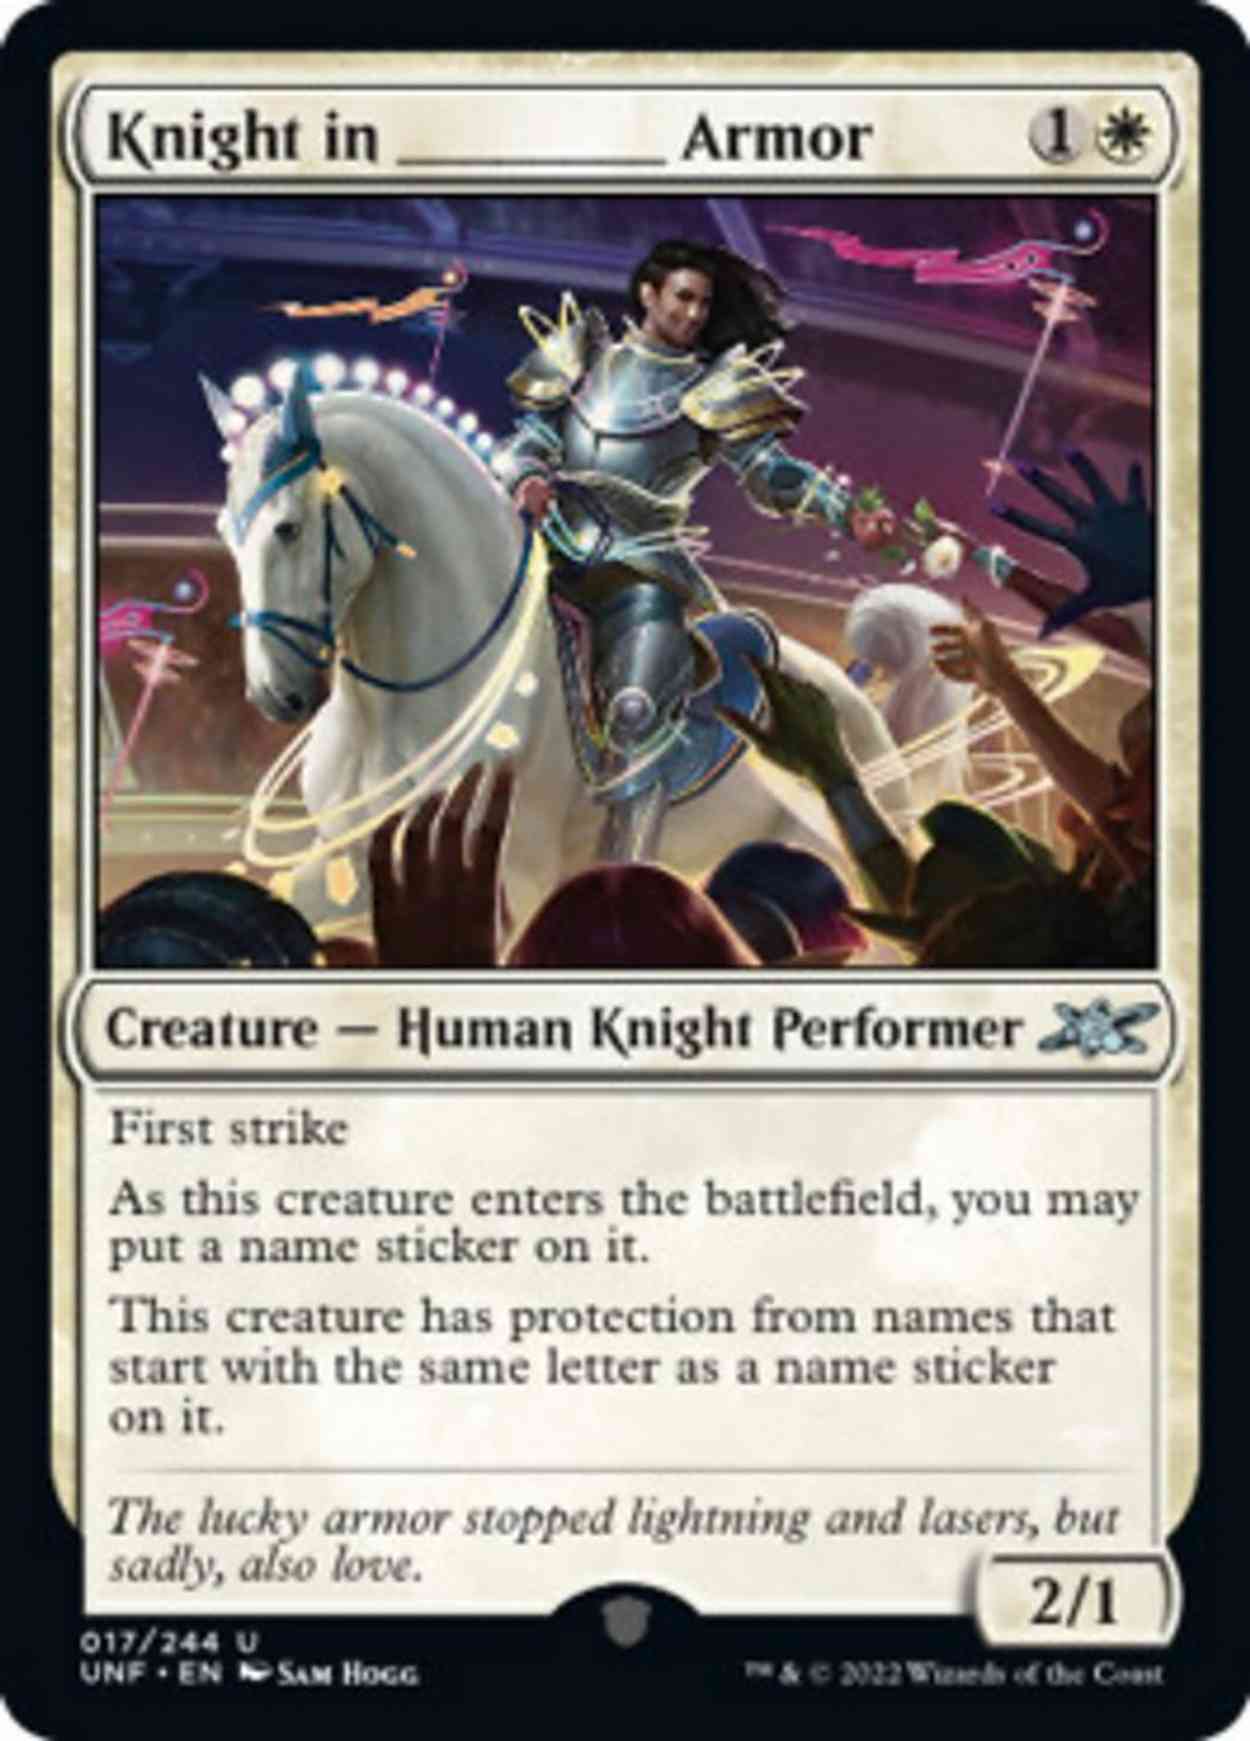 Knight in _____ Armor magic card front